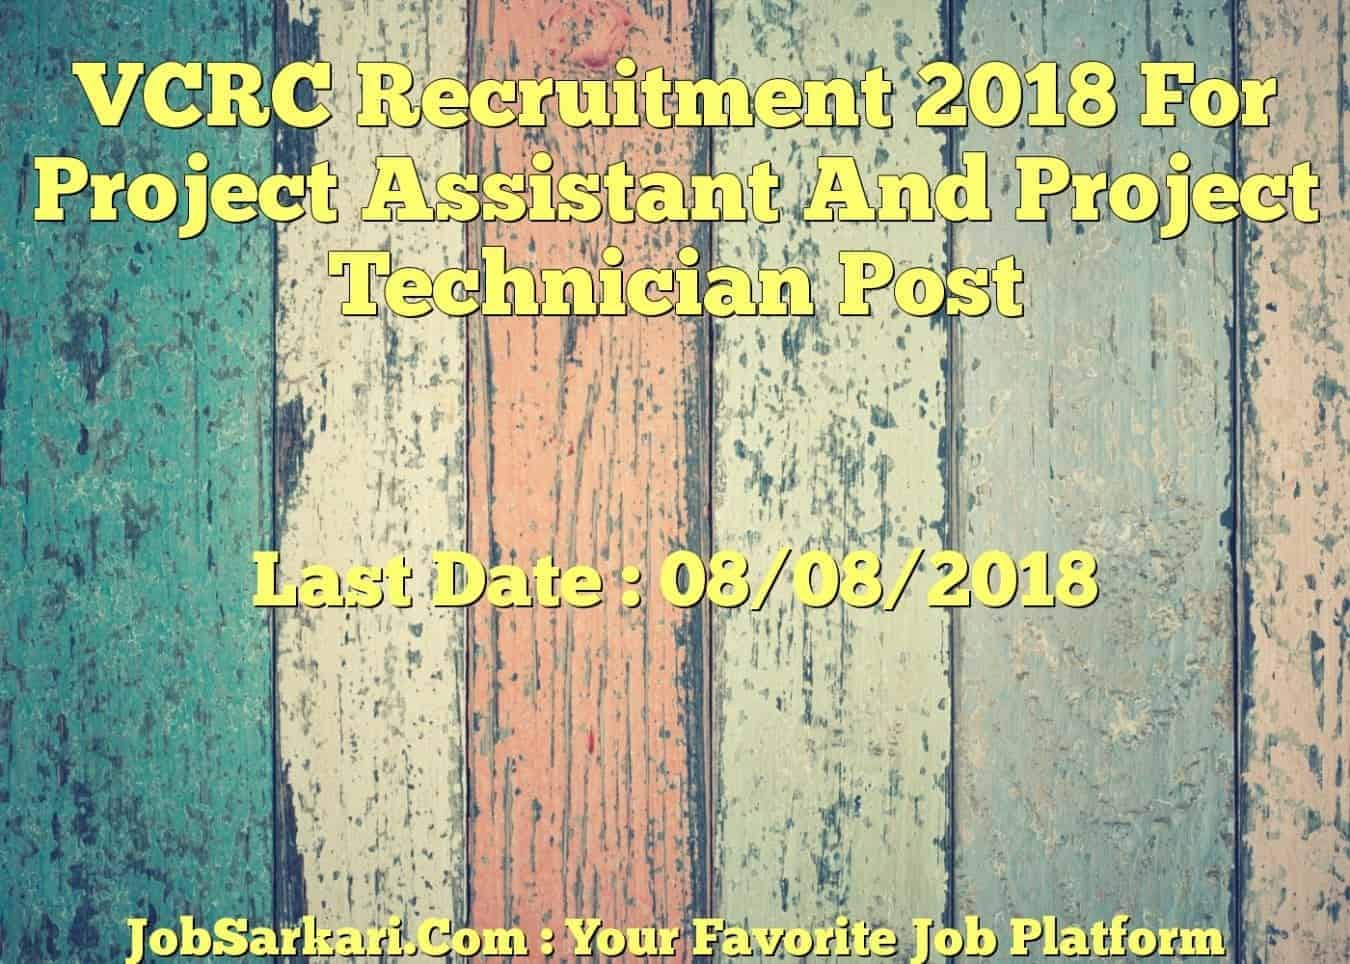 VCRC Recruitment 2018 For Project Assistant And Project Technician Post